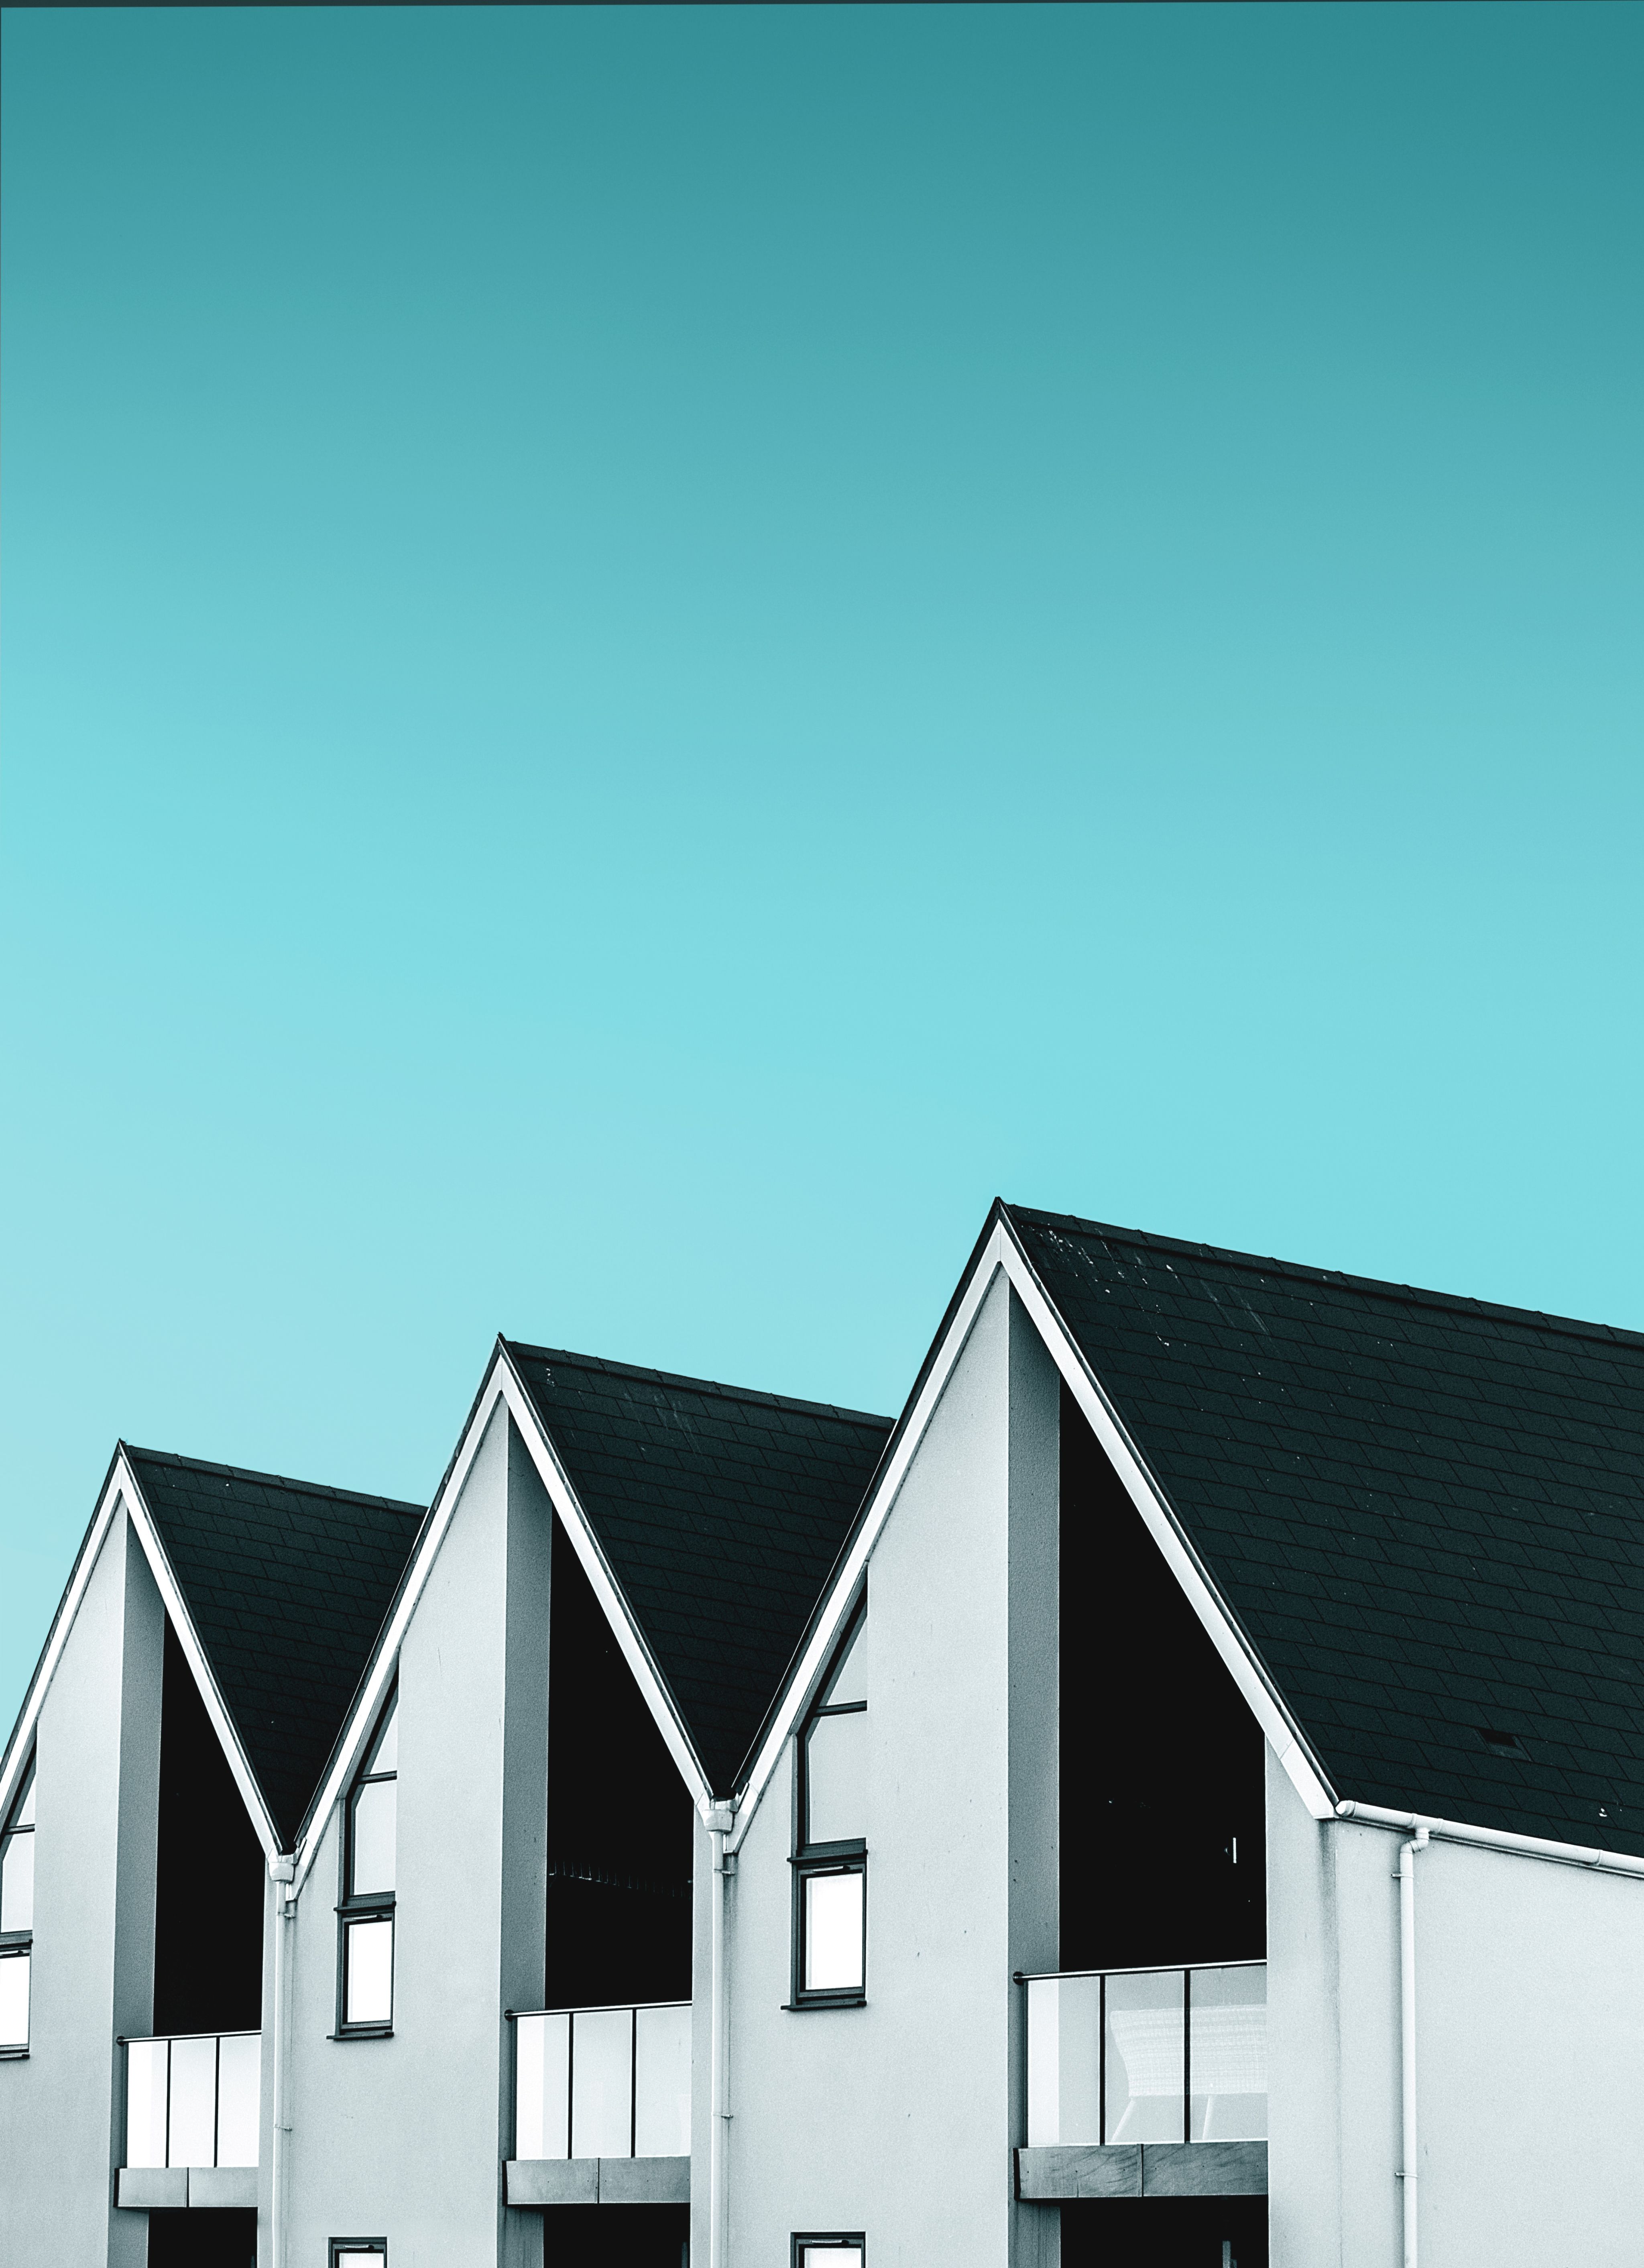 The roofs of three houses in a row with blue sky in the background